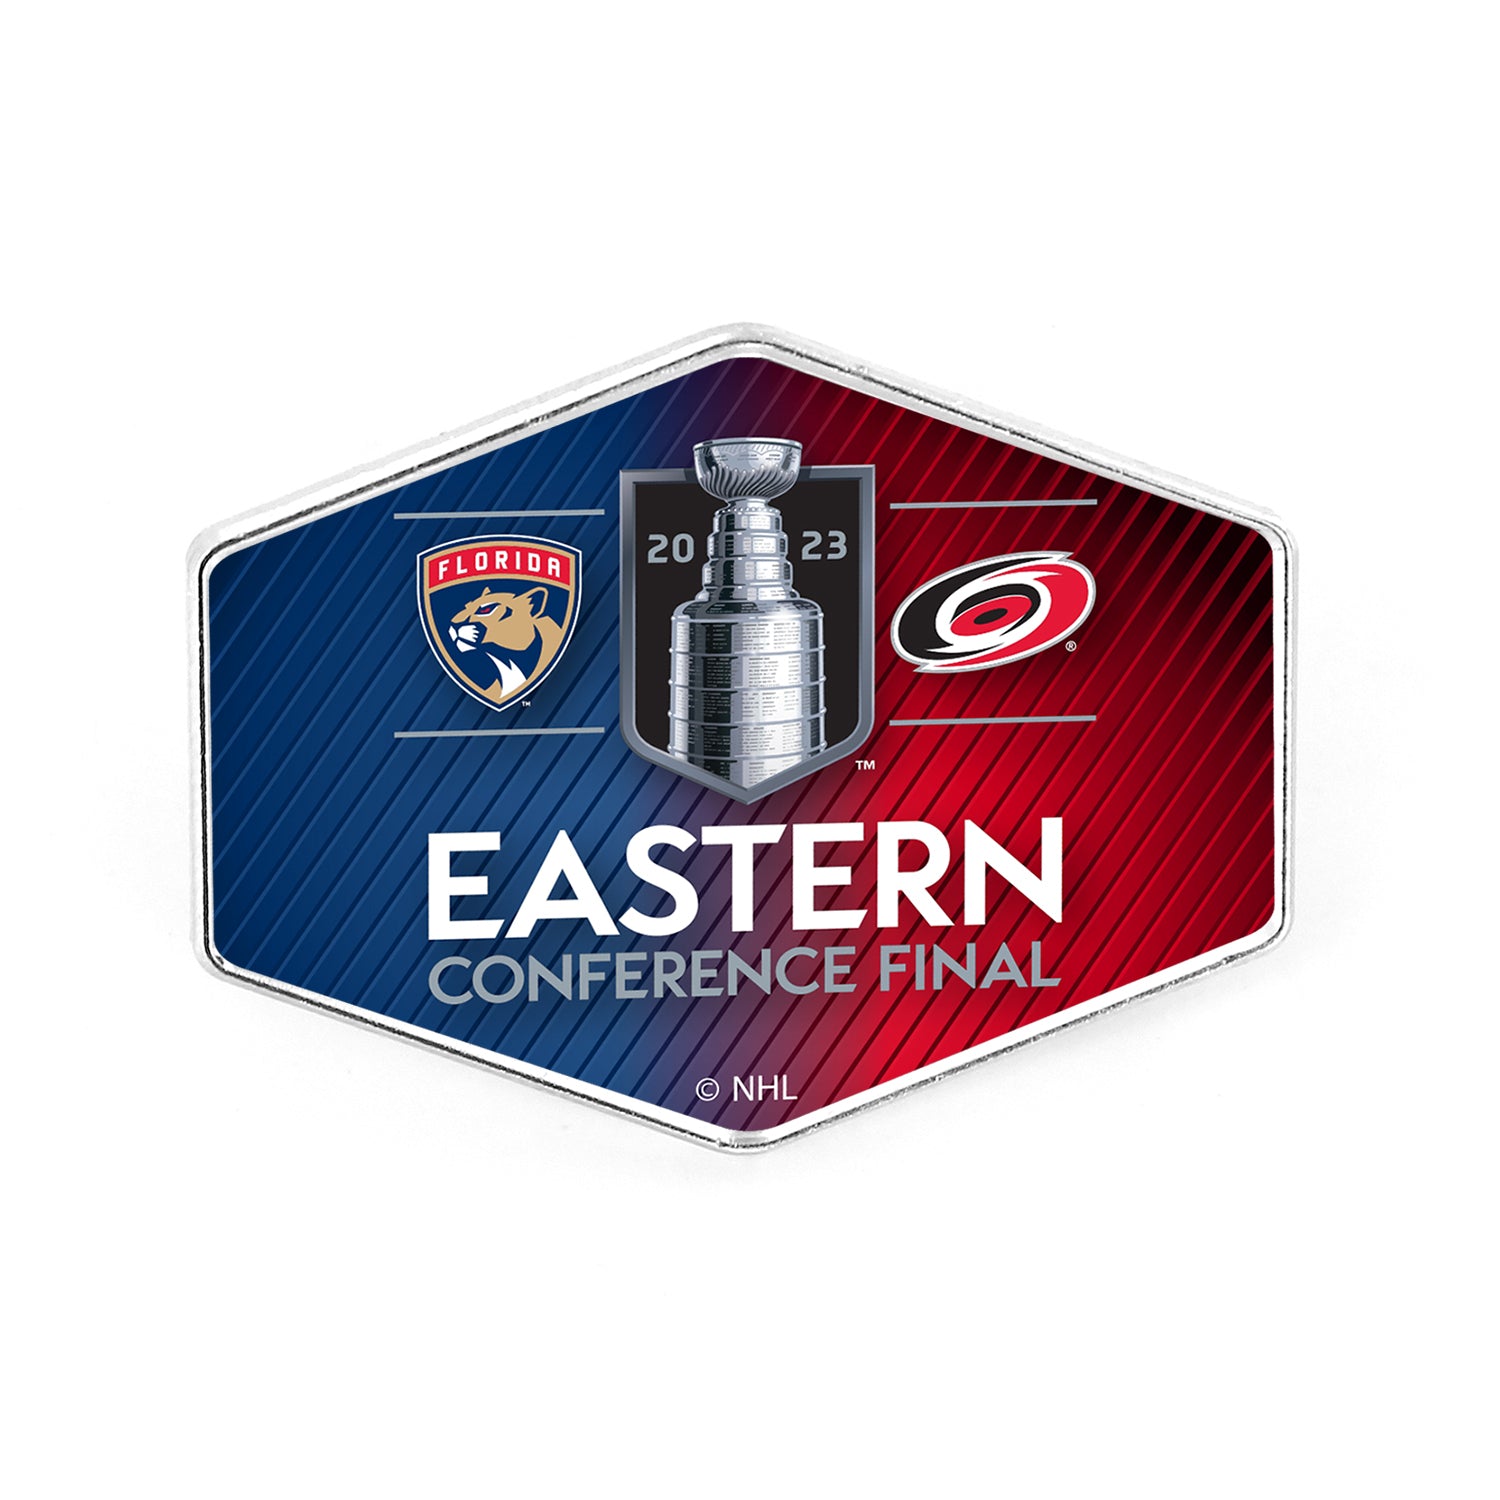 Red and Blue pin with Hurricanes and Panthers logos that says Eastern Conference Final.